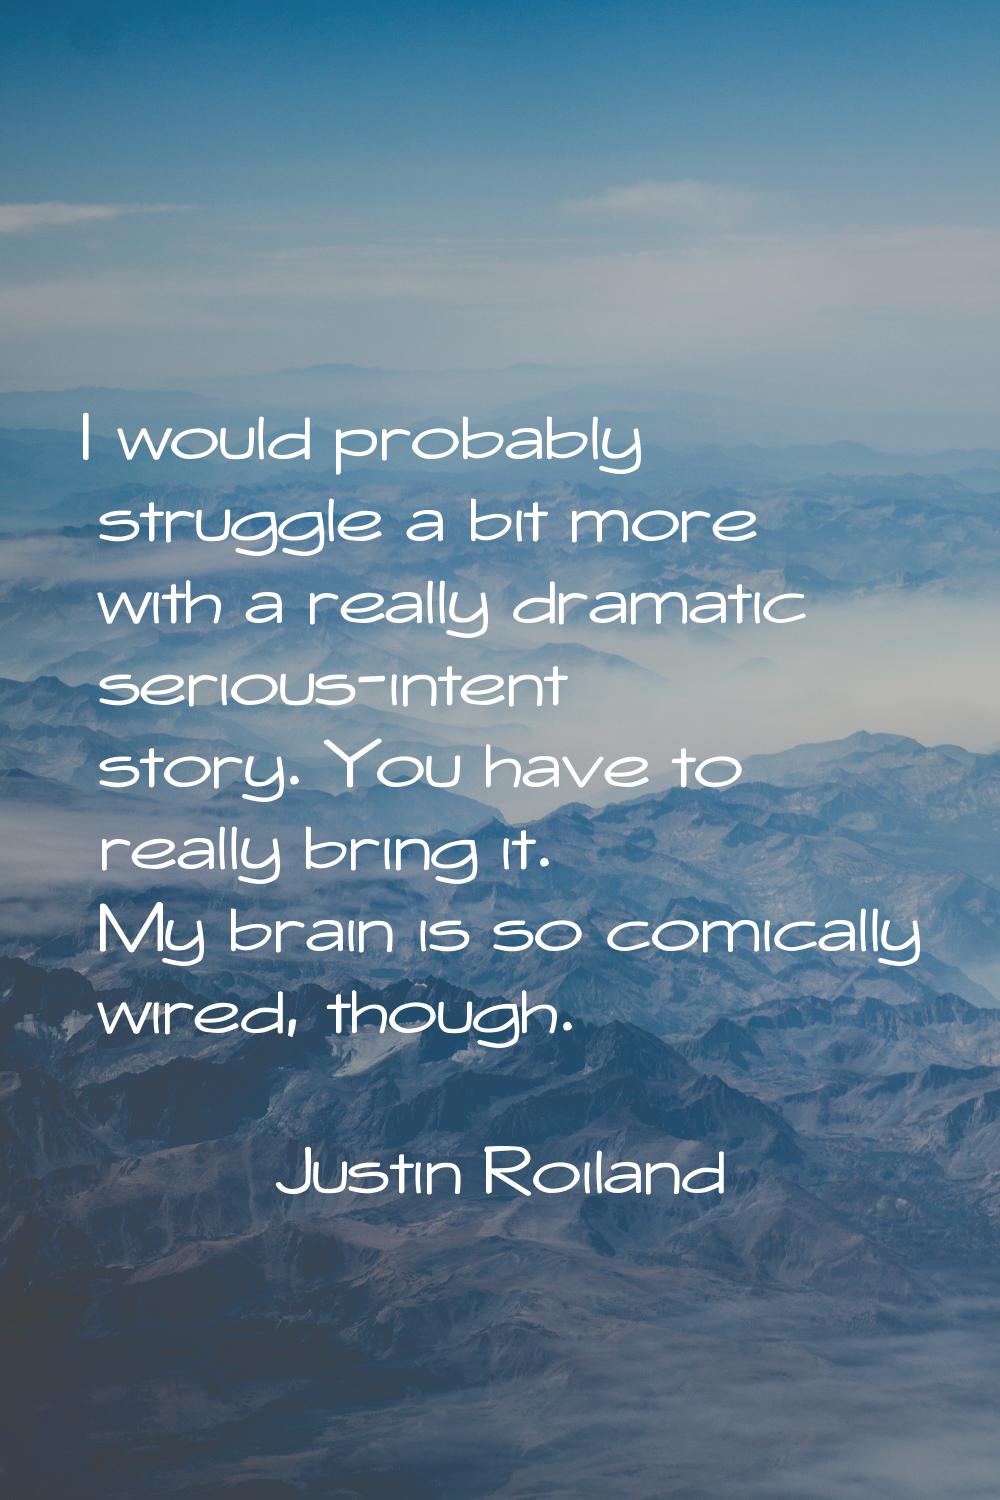 I would probably struggle a bit more with a really dramatic serious-intent story. You have to reall